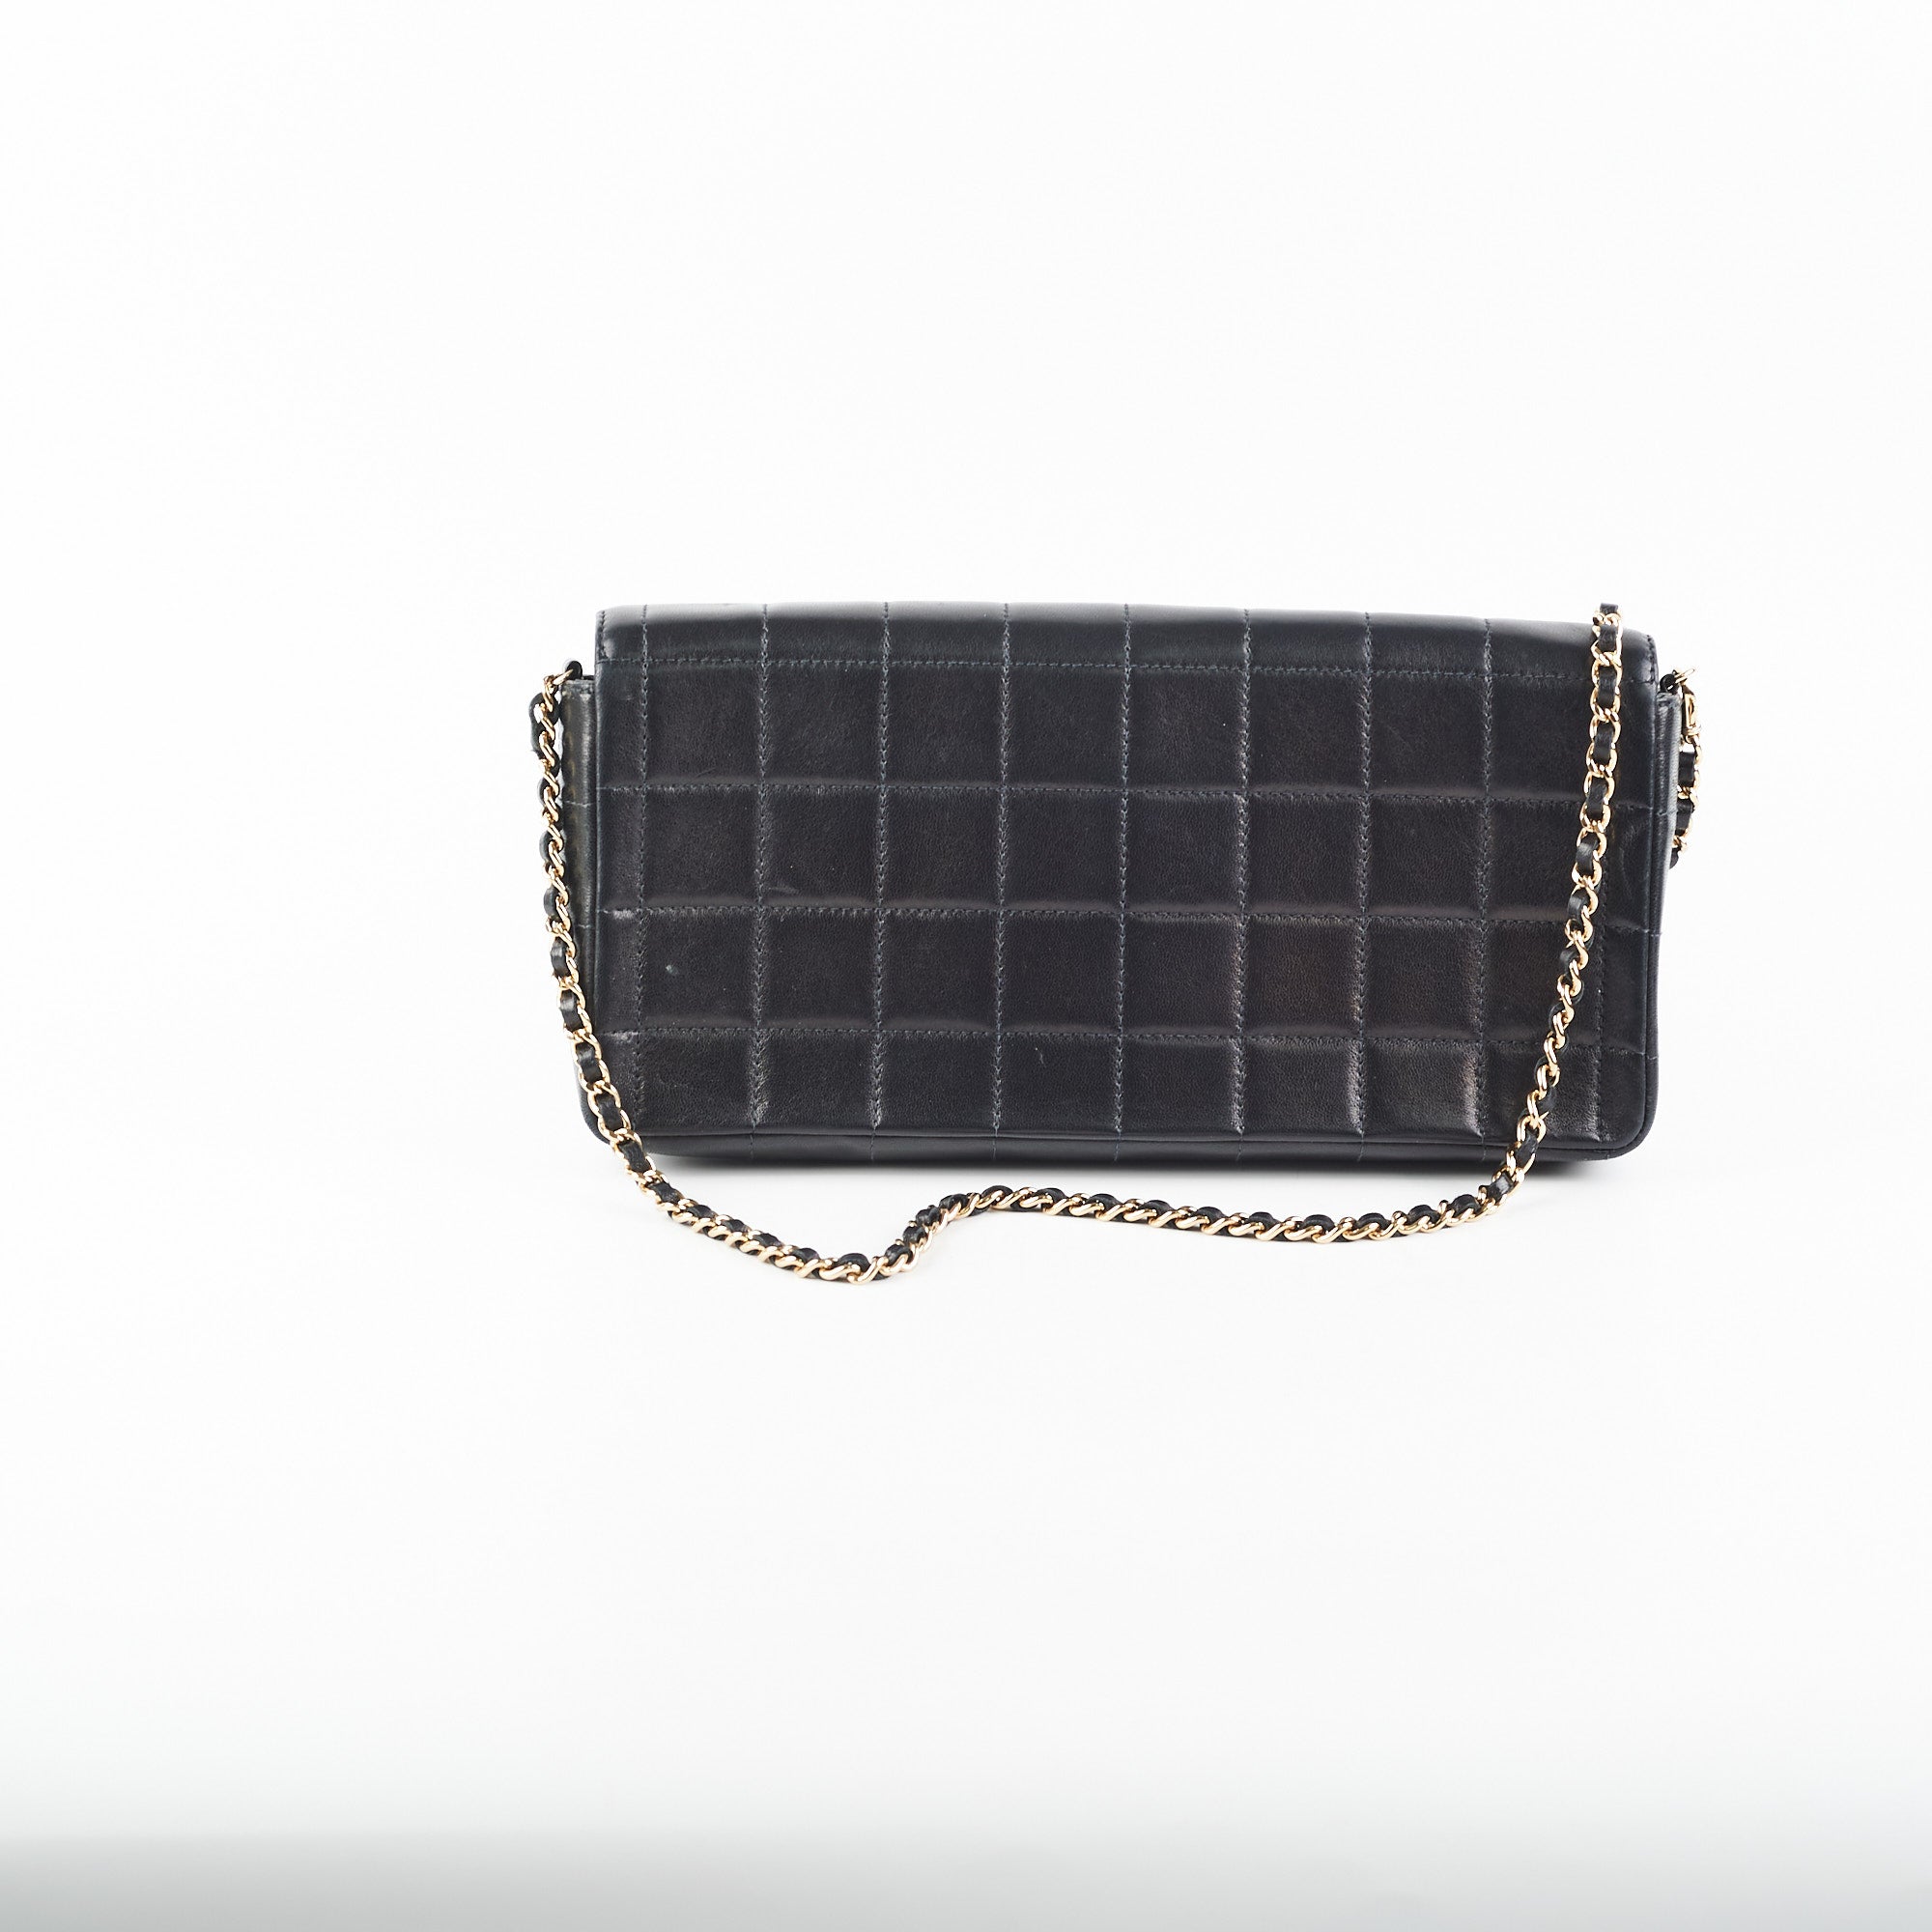 Vintage and Musthaves Chanel black Chocolate bar bag